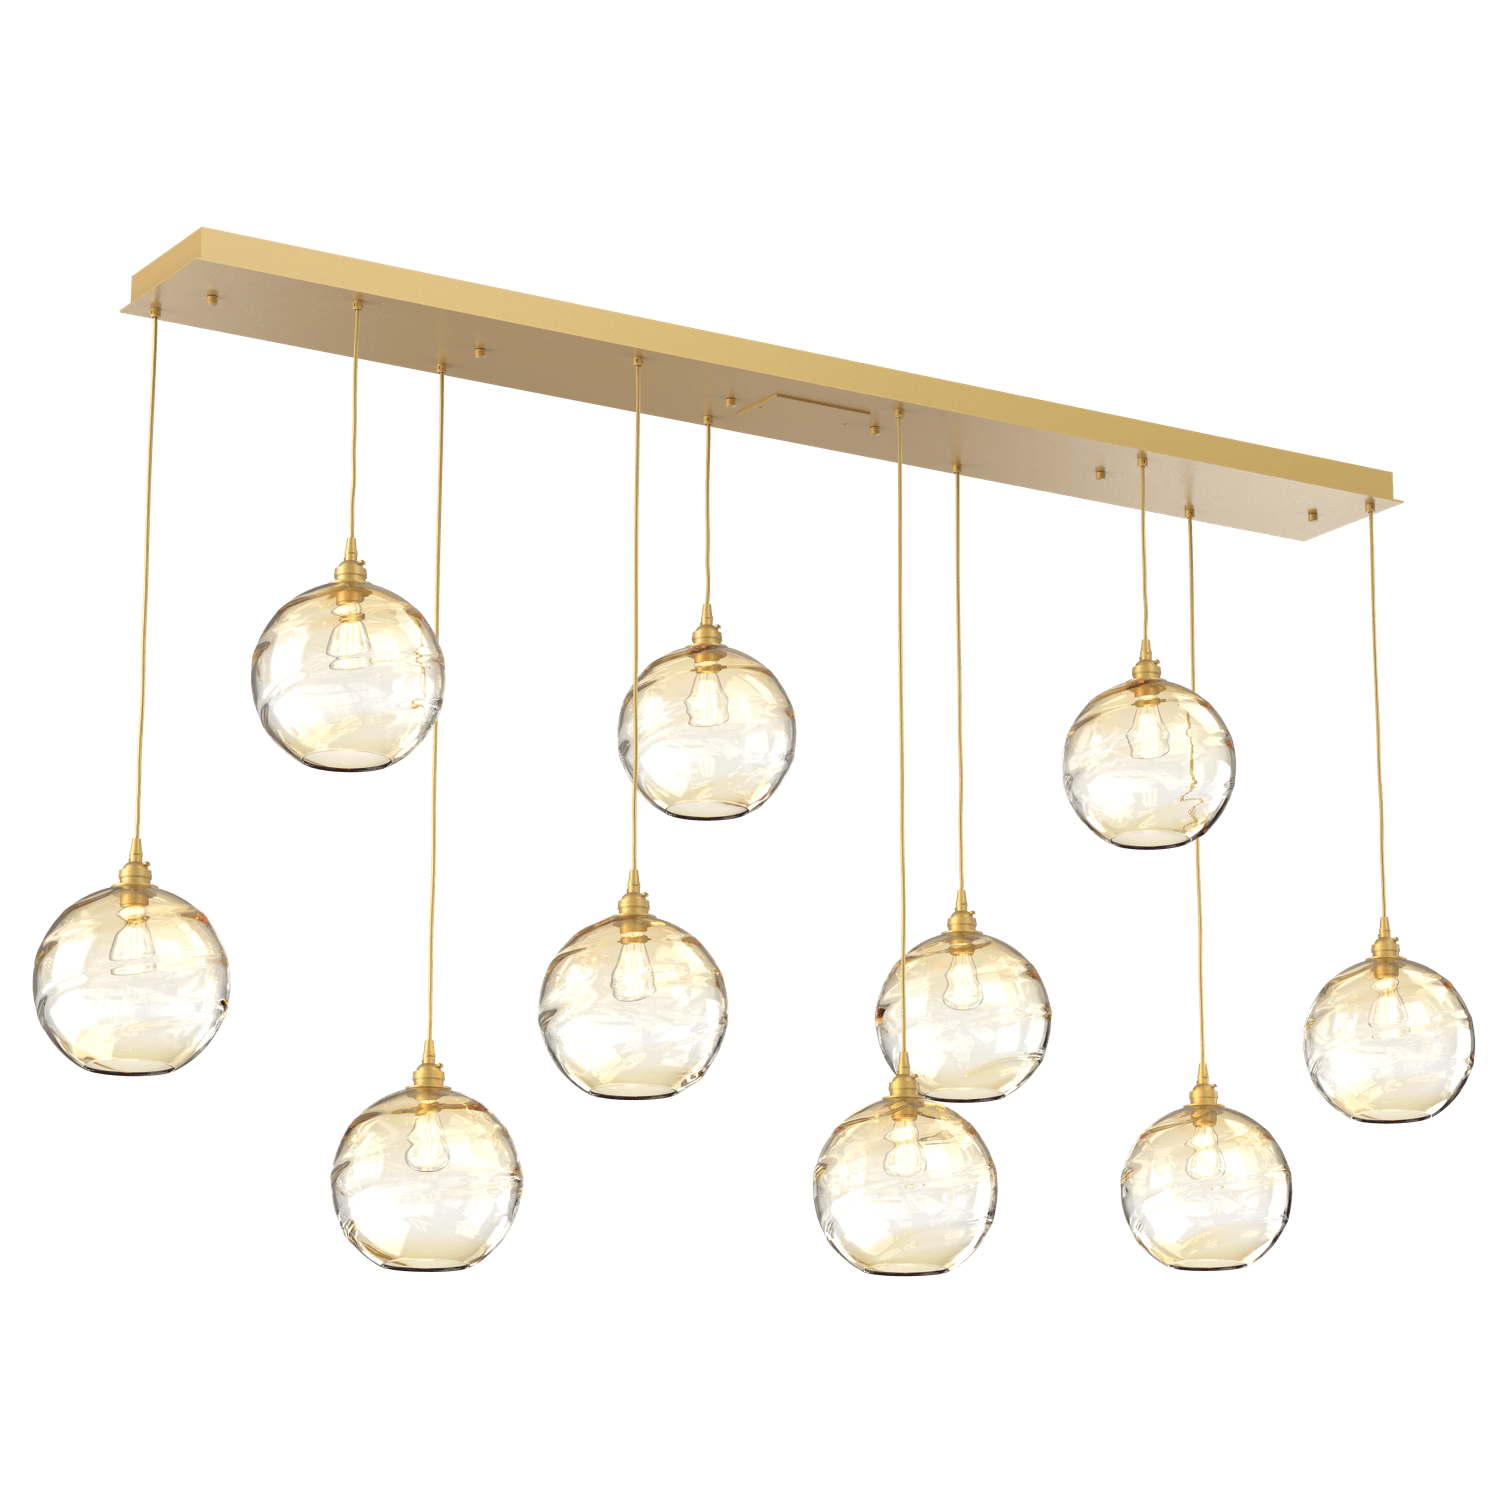 PLB0047-10-GB-OA-Hammerton-Studio-Optic-Blown-Glass-Terra-10-light-linear-pendant-chandelier-with-gilded-brass-finish-and-optic-amber-blown-glass-shades-and-incandescent-lamping